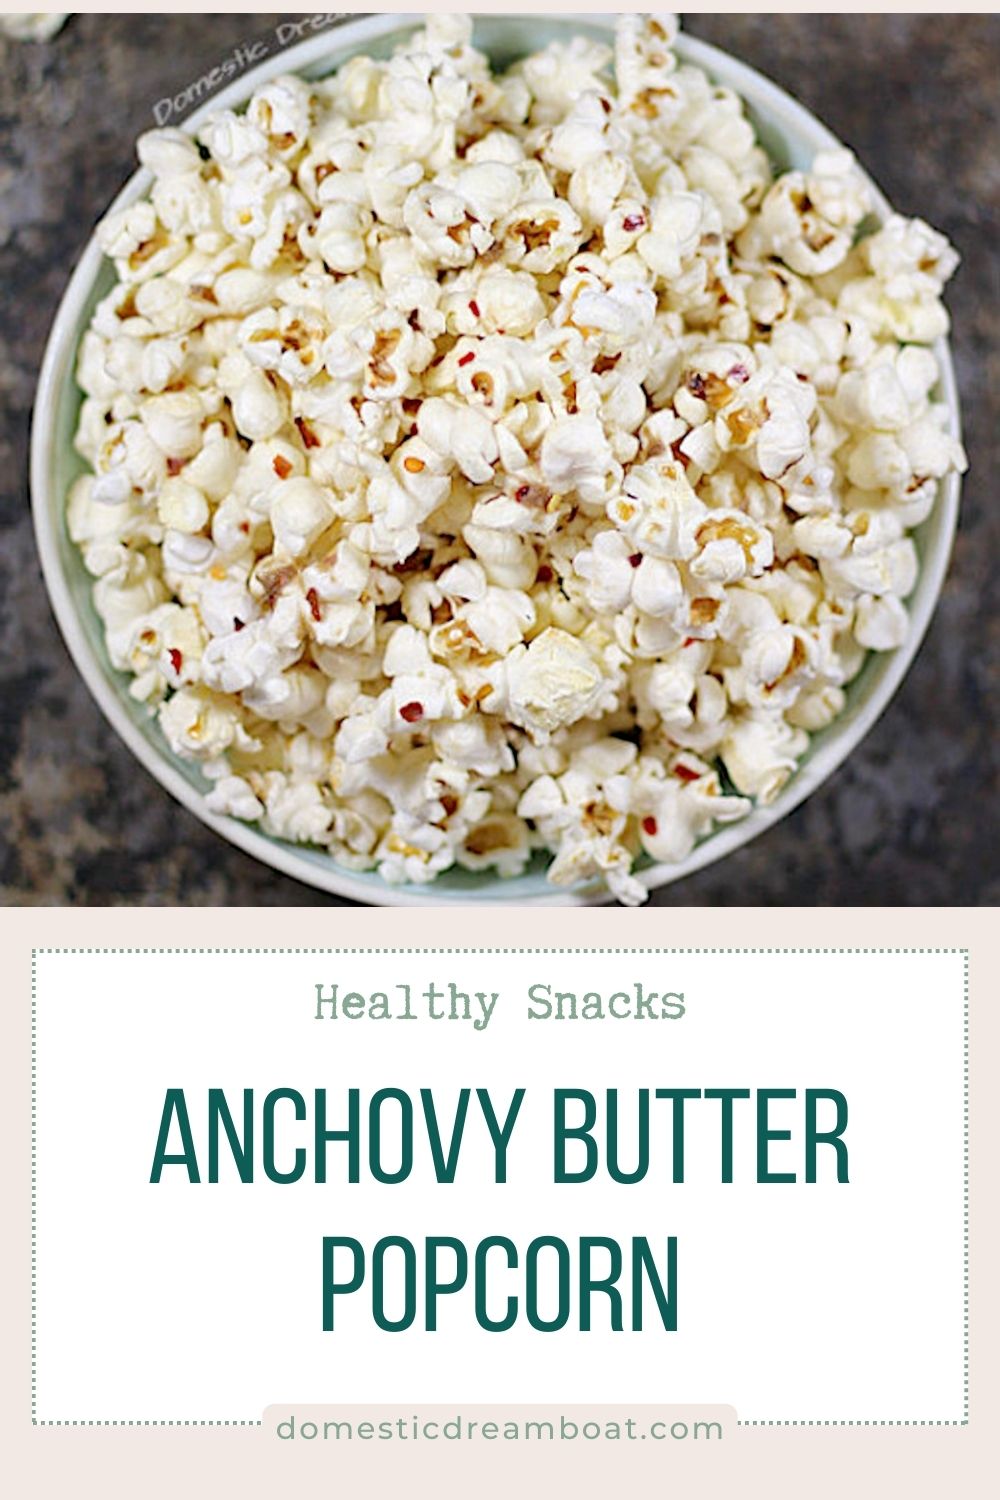 Anchovy Butter Popcorn